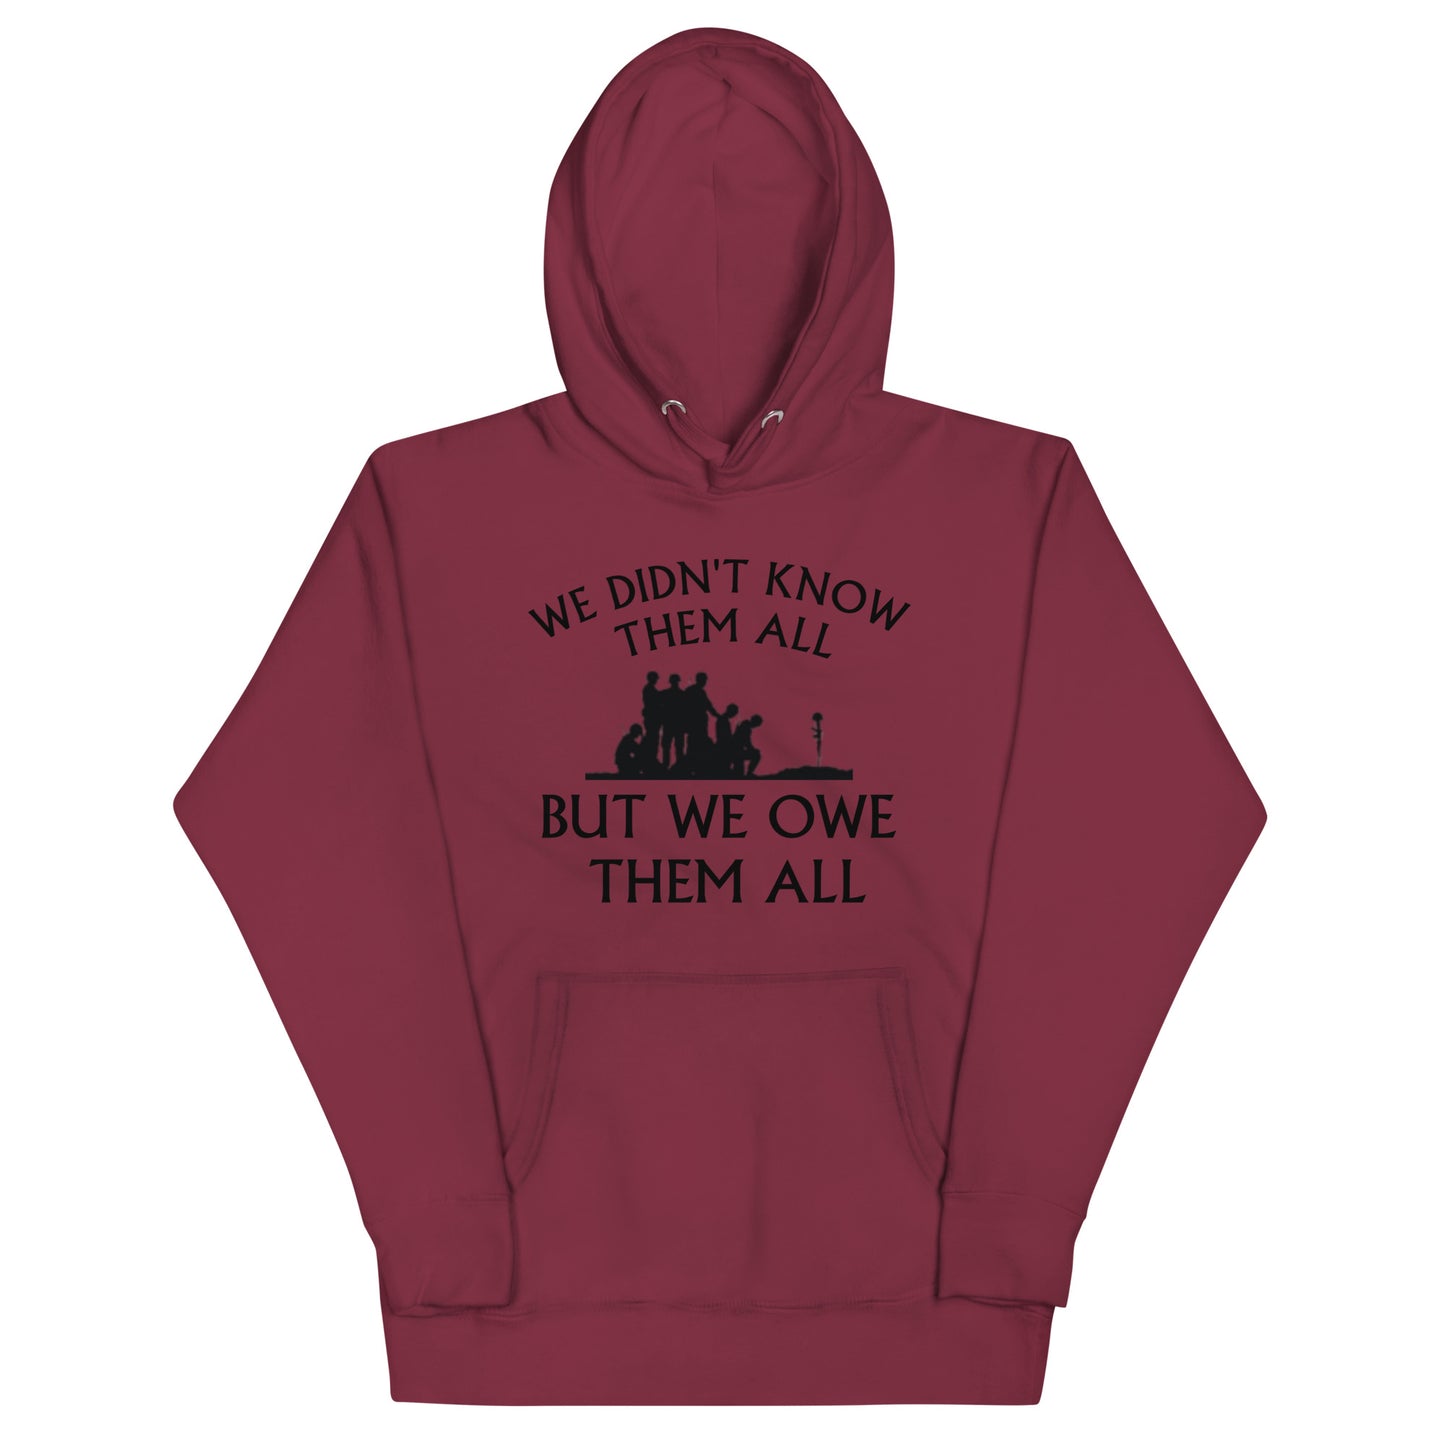 We didn't know them all but we OWE them all Unisex Hoodie